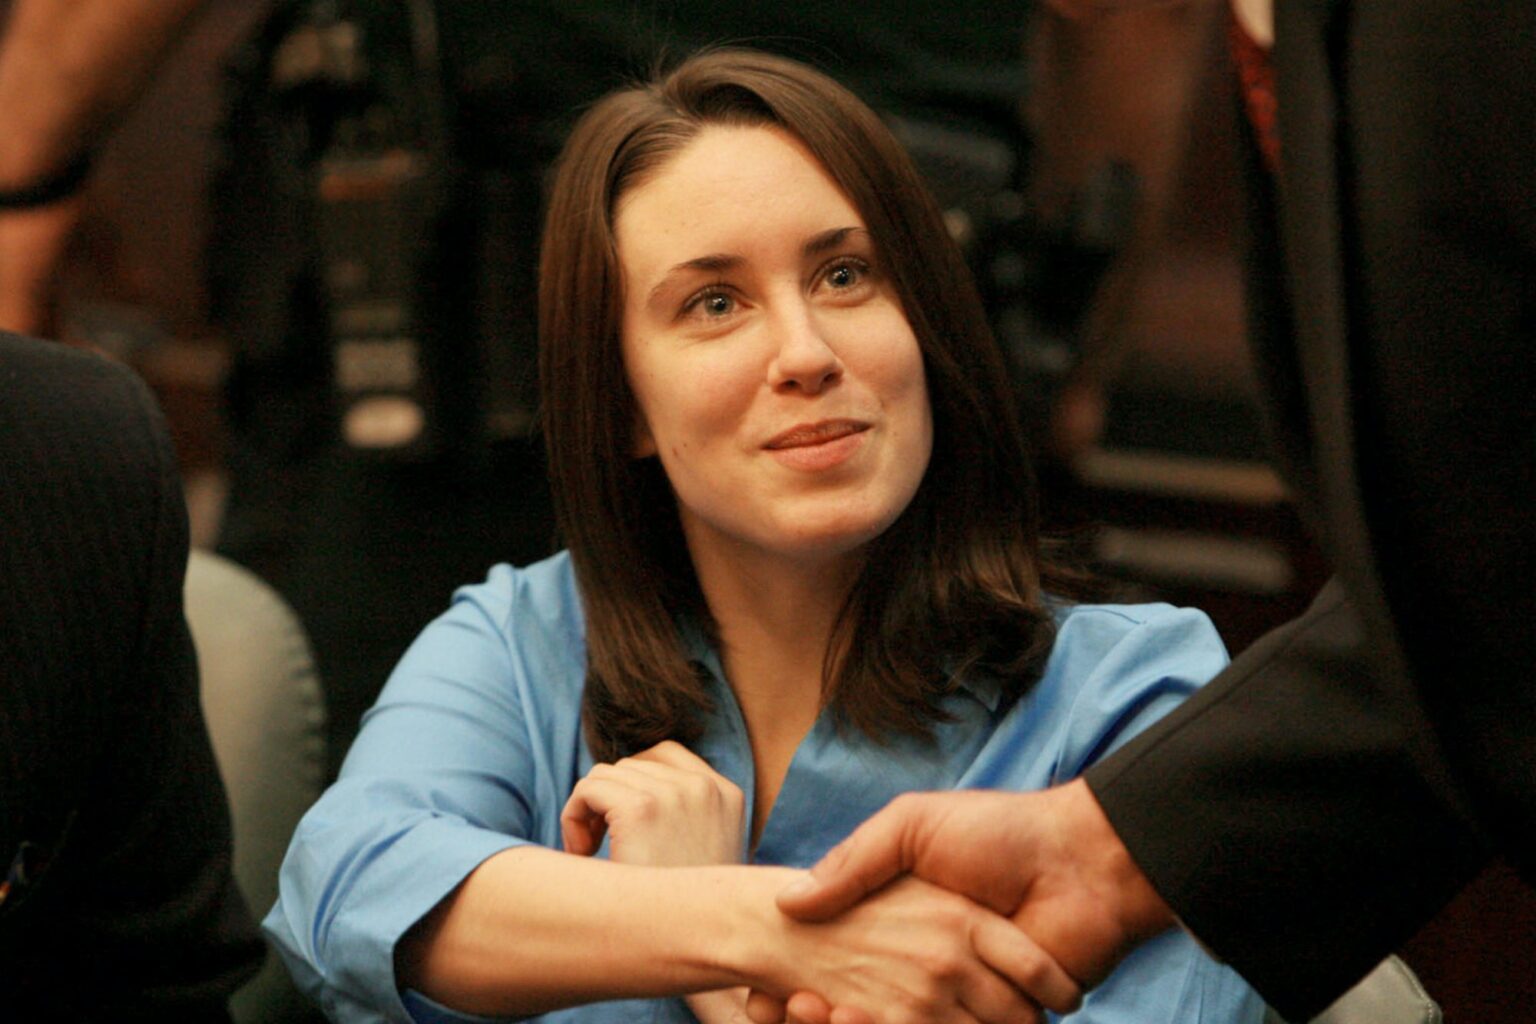 Casey Anthony is going to open an investigation business. Find out what the former murder suspect is up to now.